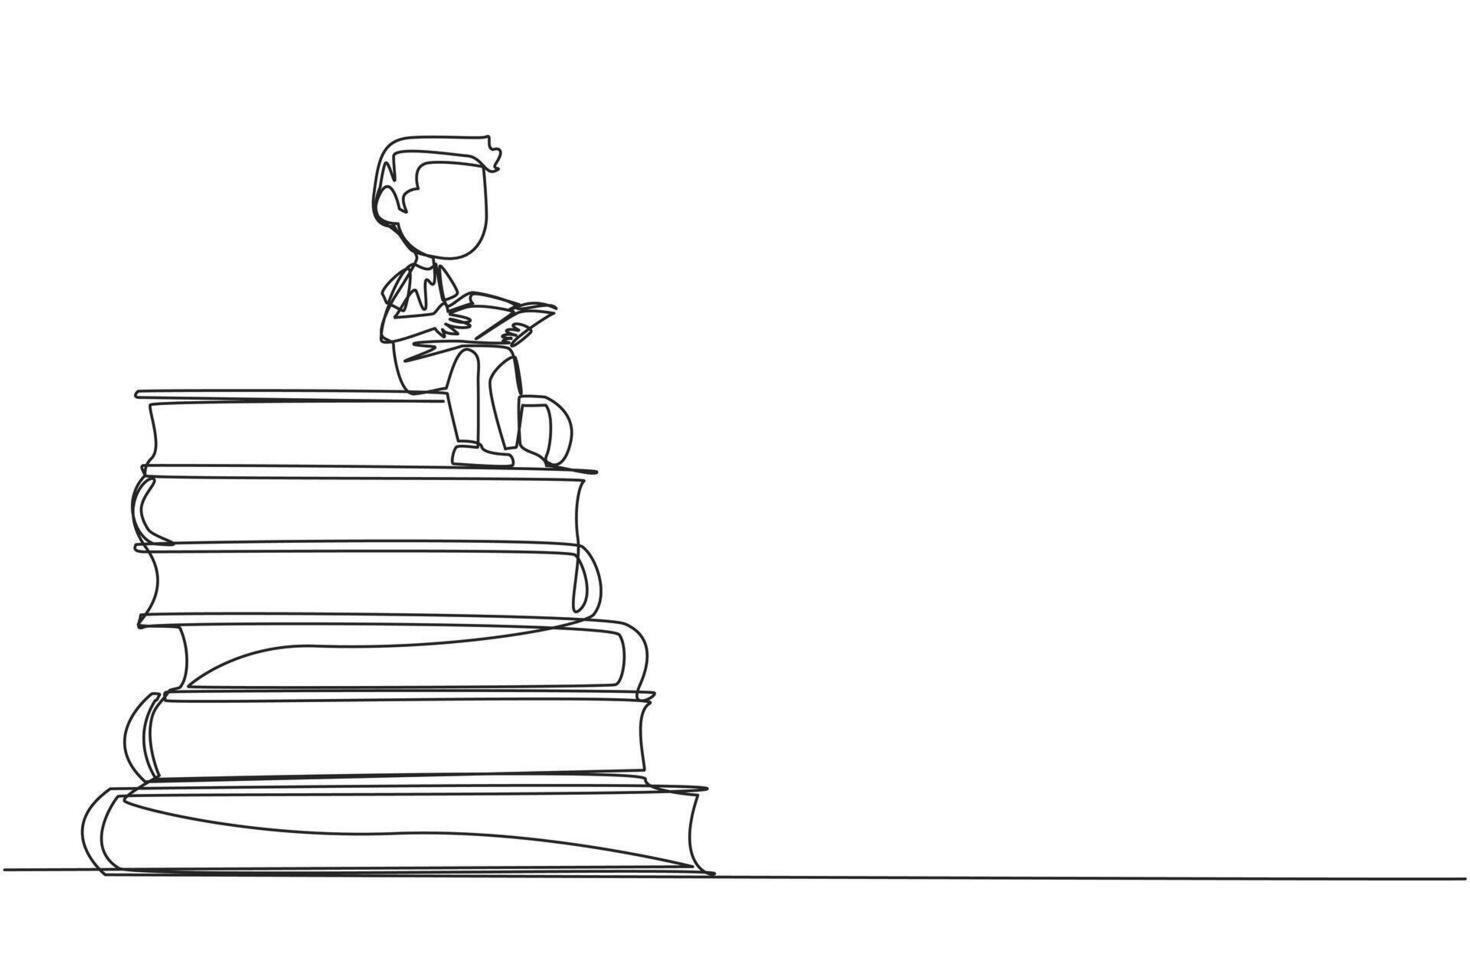 Single continuous line drawing happy boy sitting on a pile of books reading a book. High interest in reading. Opening horizons of thinking. Book festival concept. One line design vector illustration